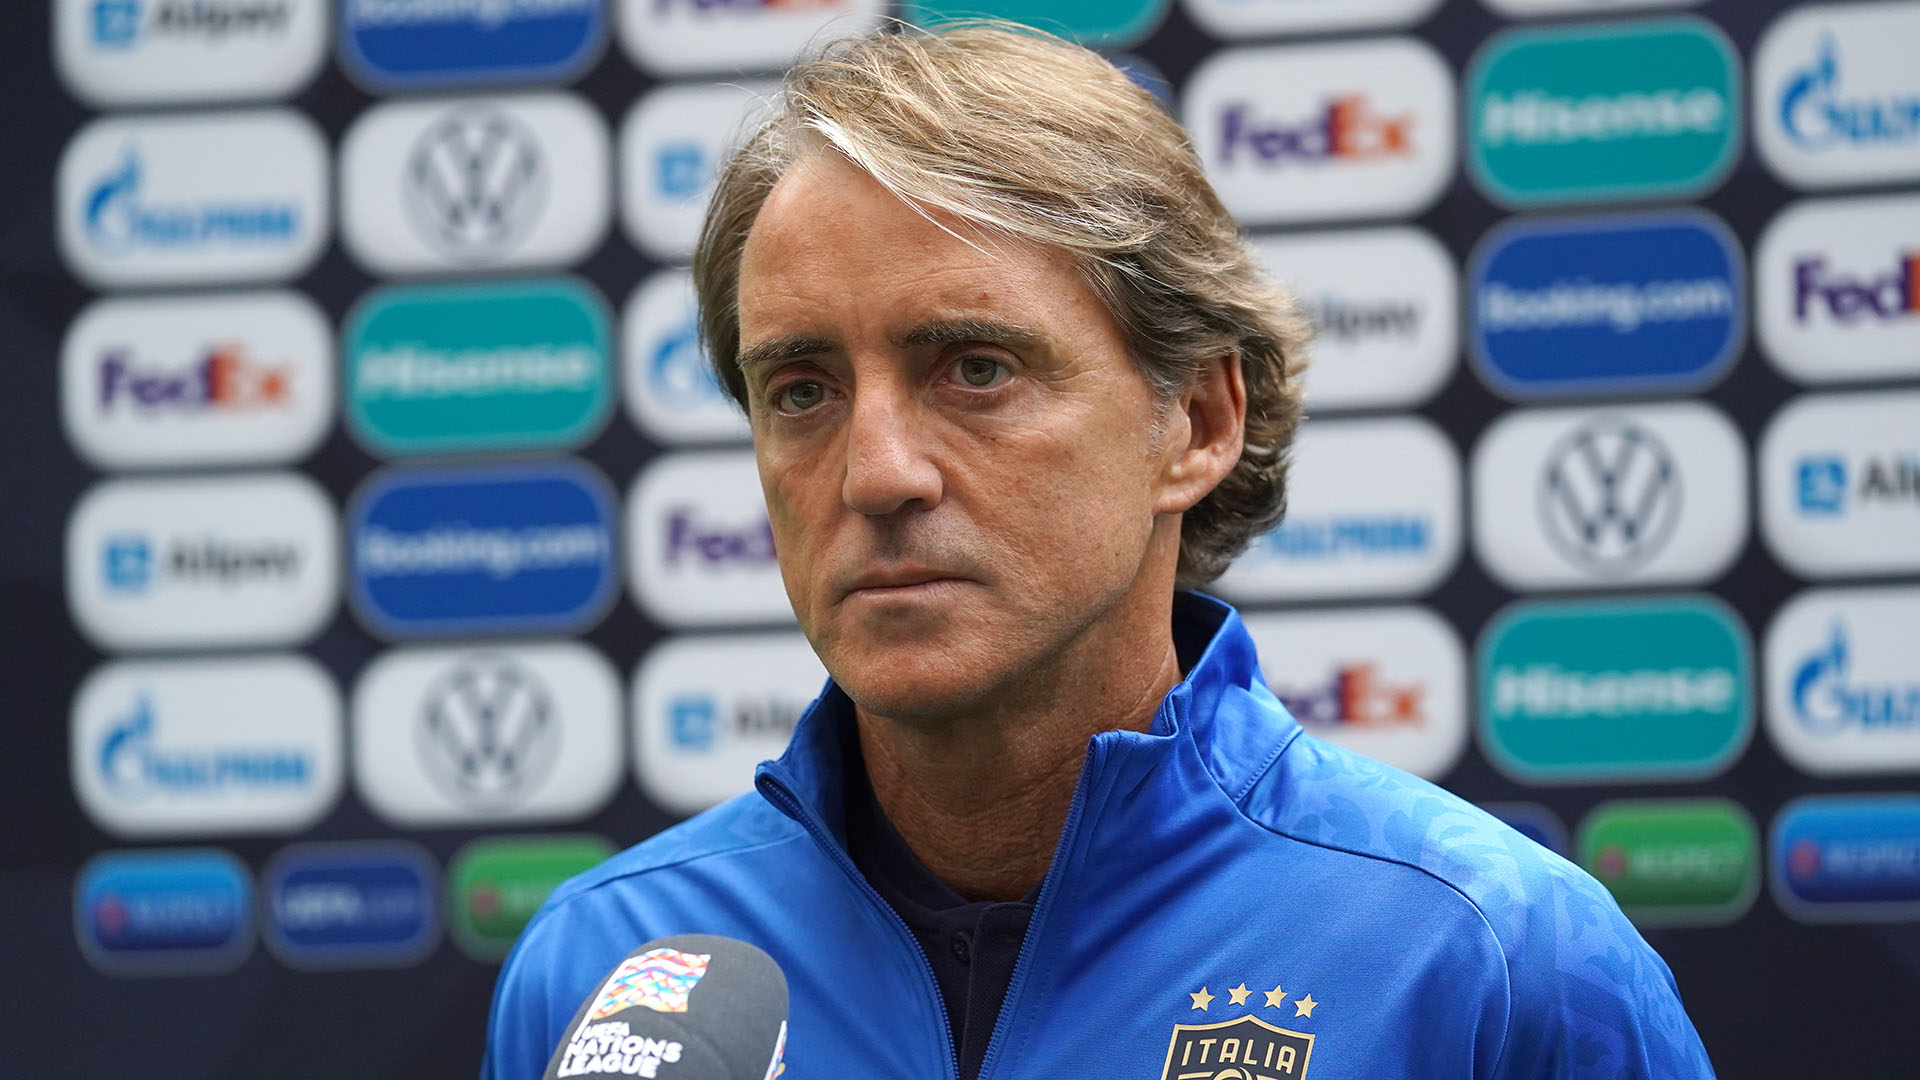 Despite having to go through the playoffs, Roberto Mancini is confident Italy will make it to the World Cup and maybe even win it.